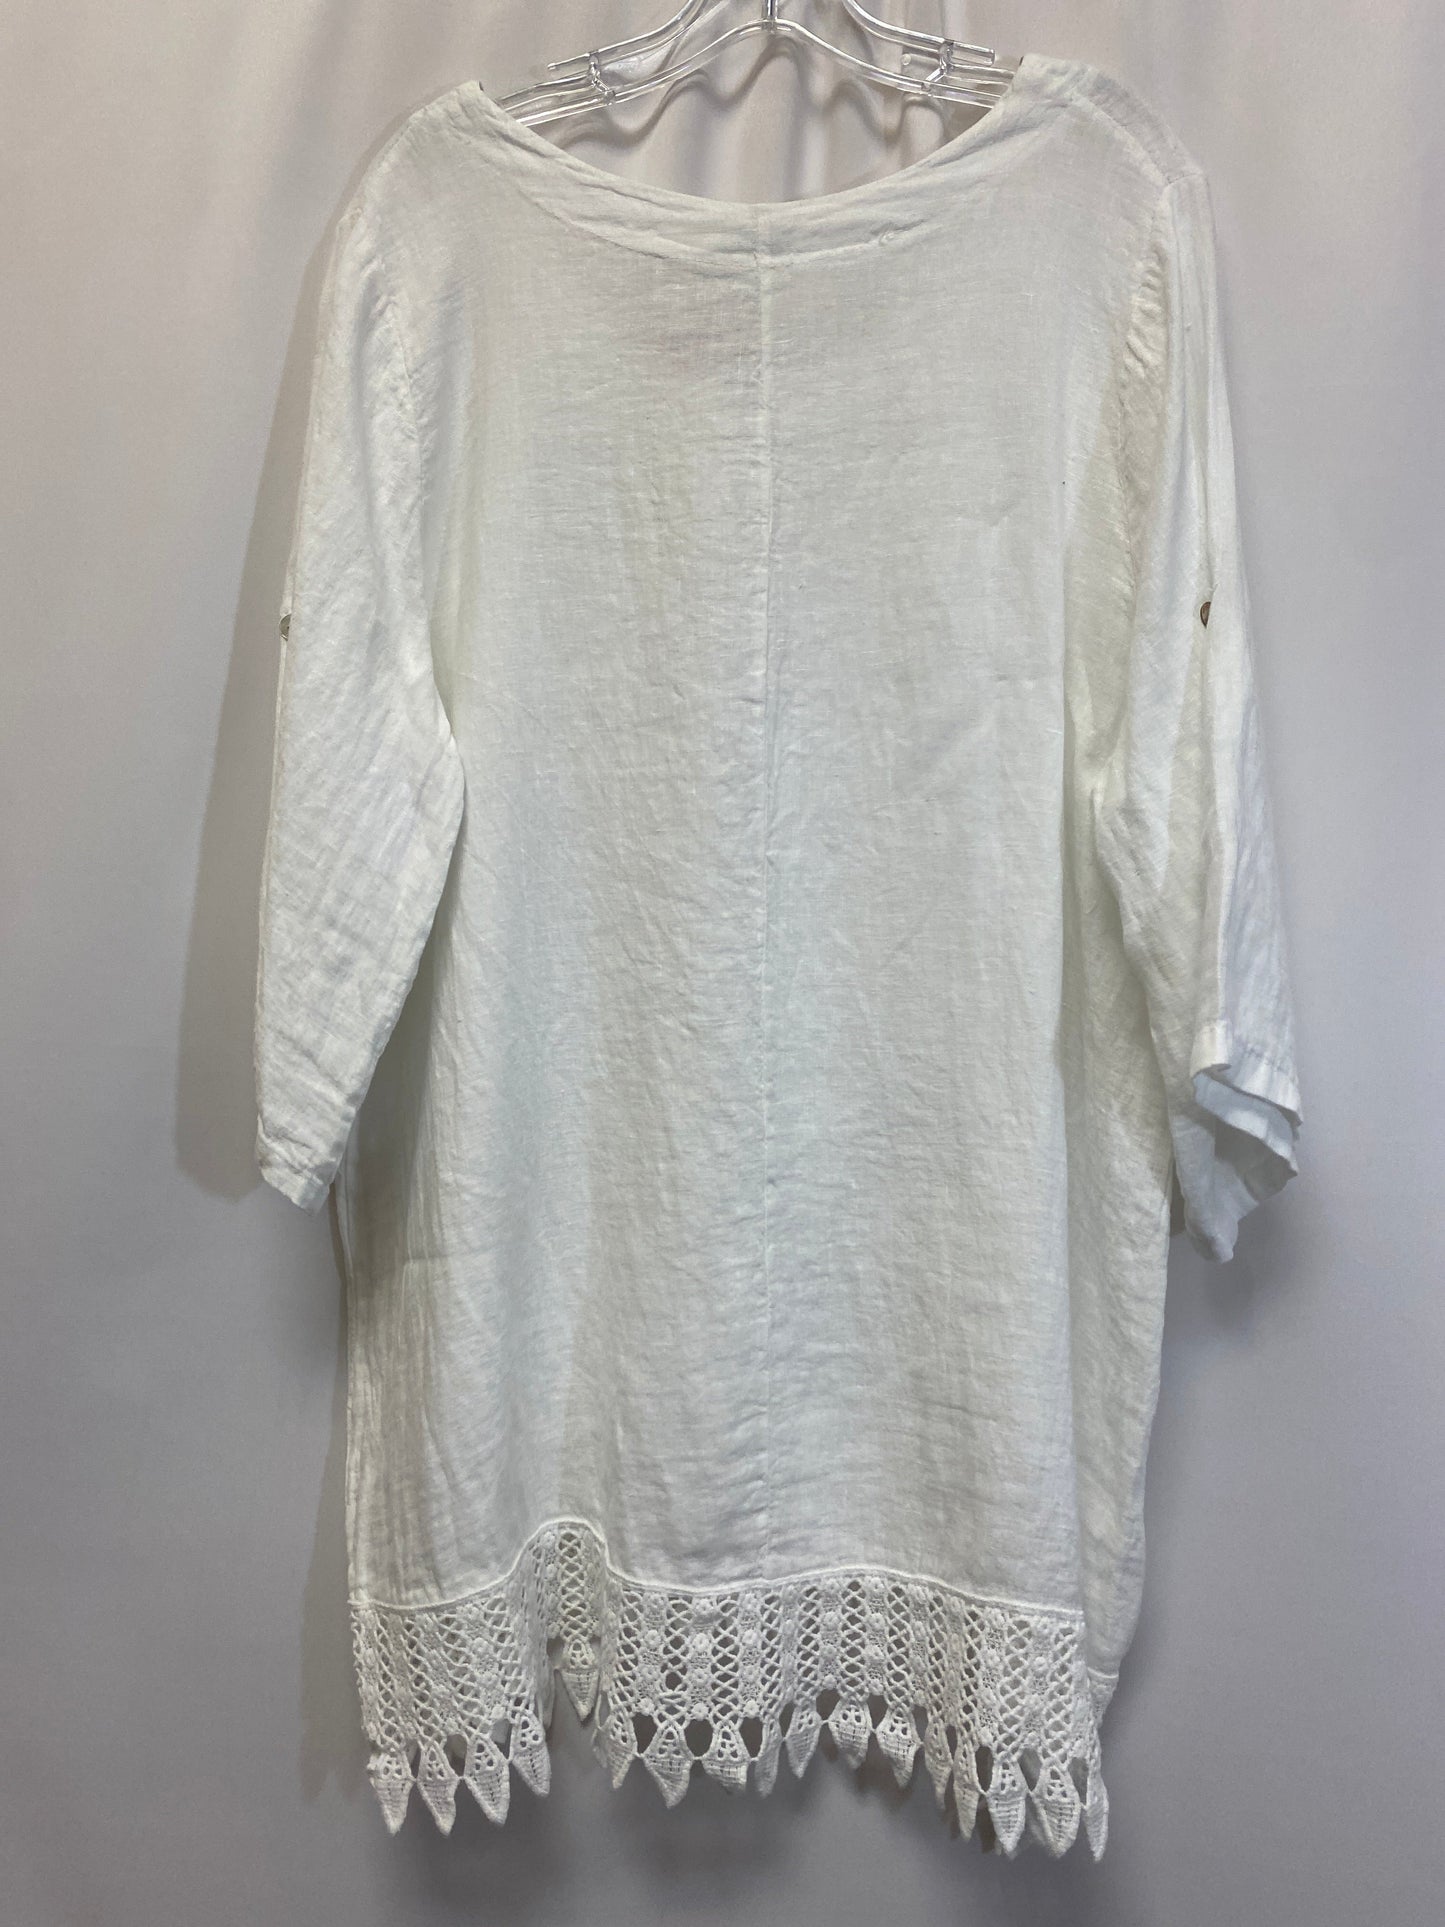 White Top Short Sleeve Clothes Mentor, Size 2x